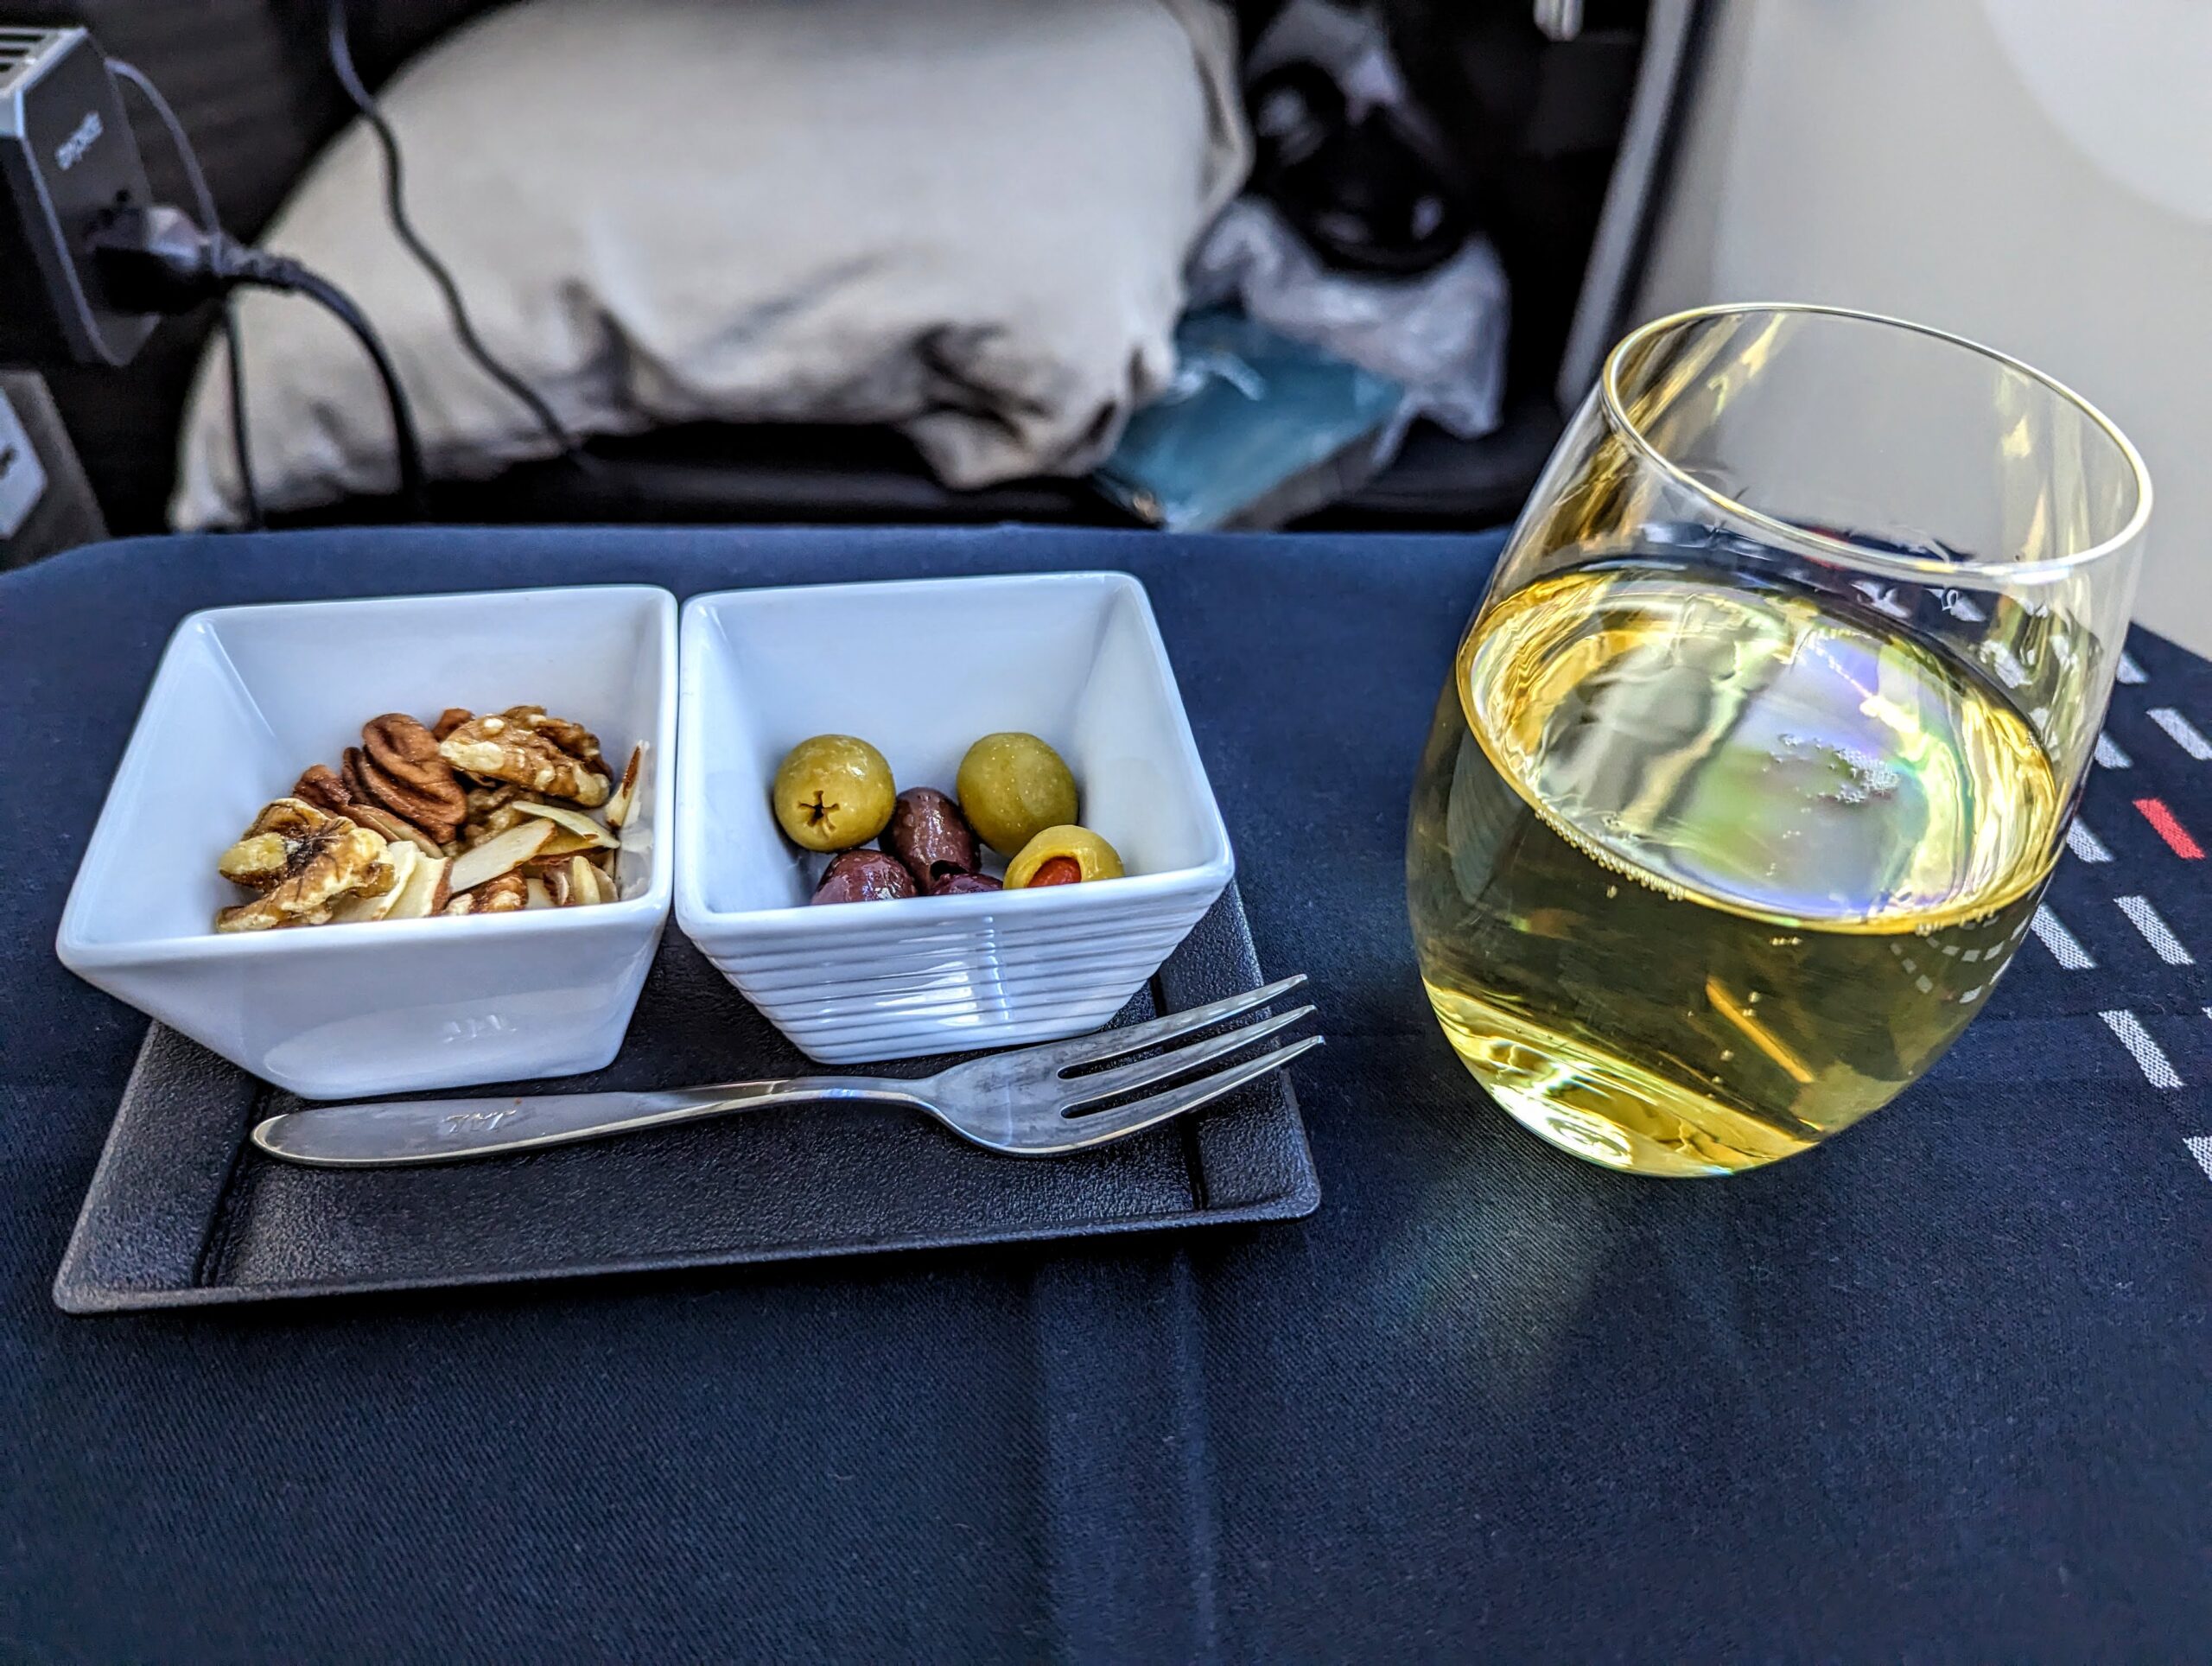 a plate with food in bowls and a glass of wine